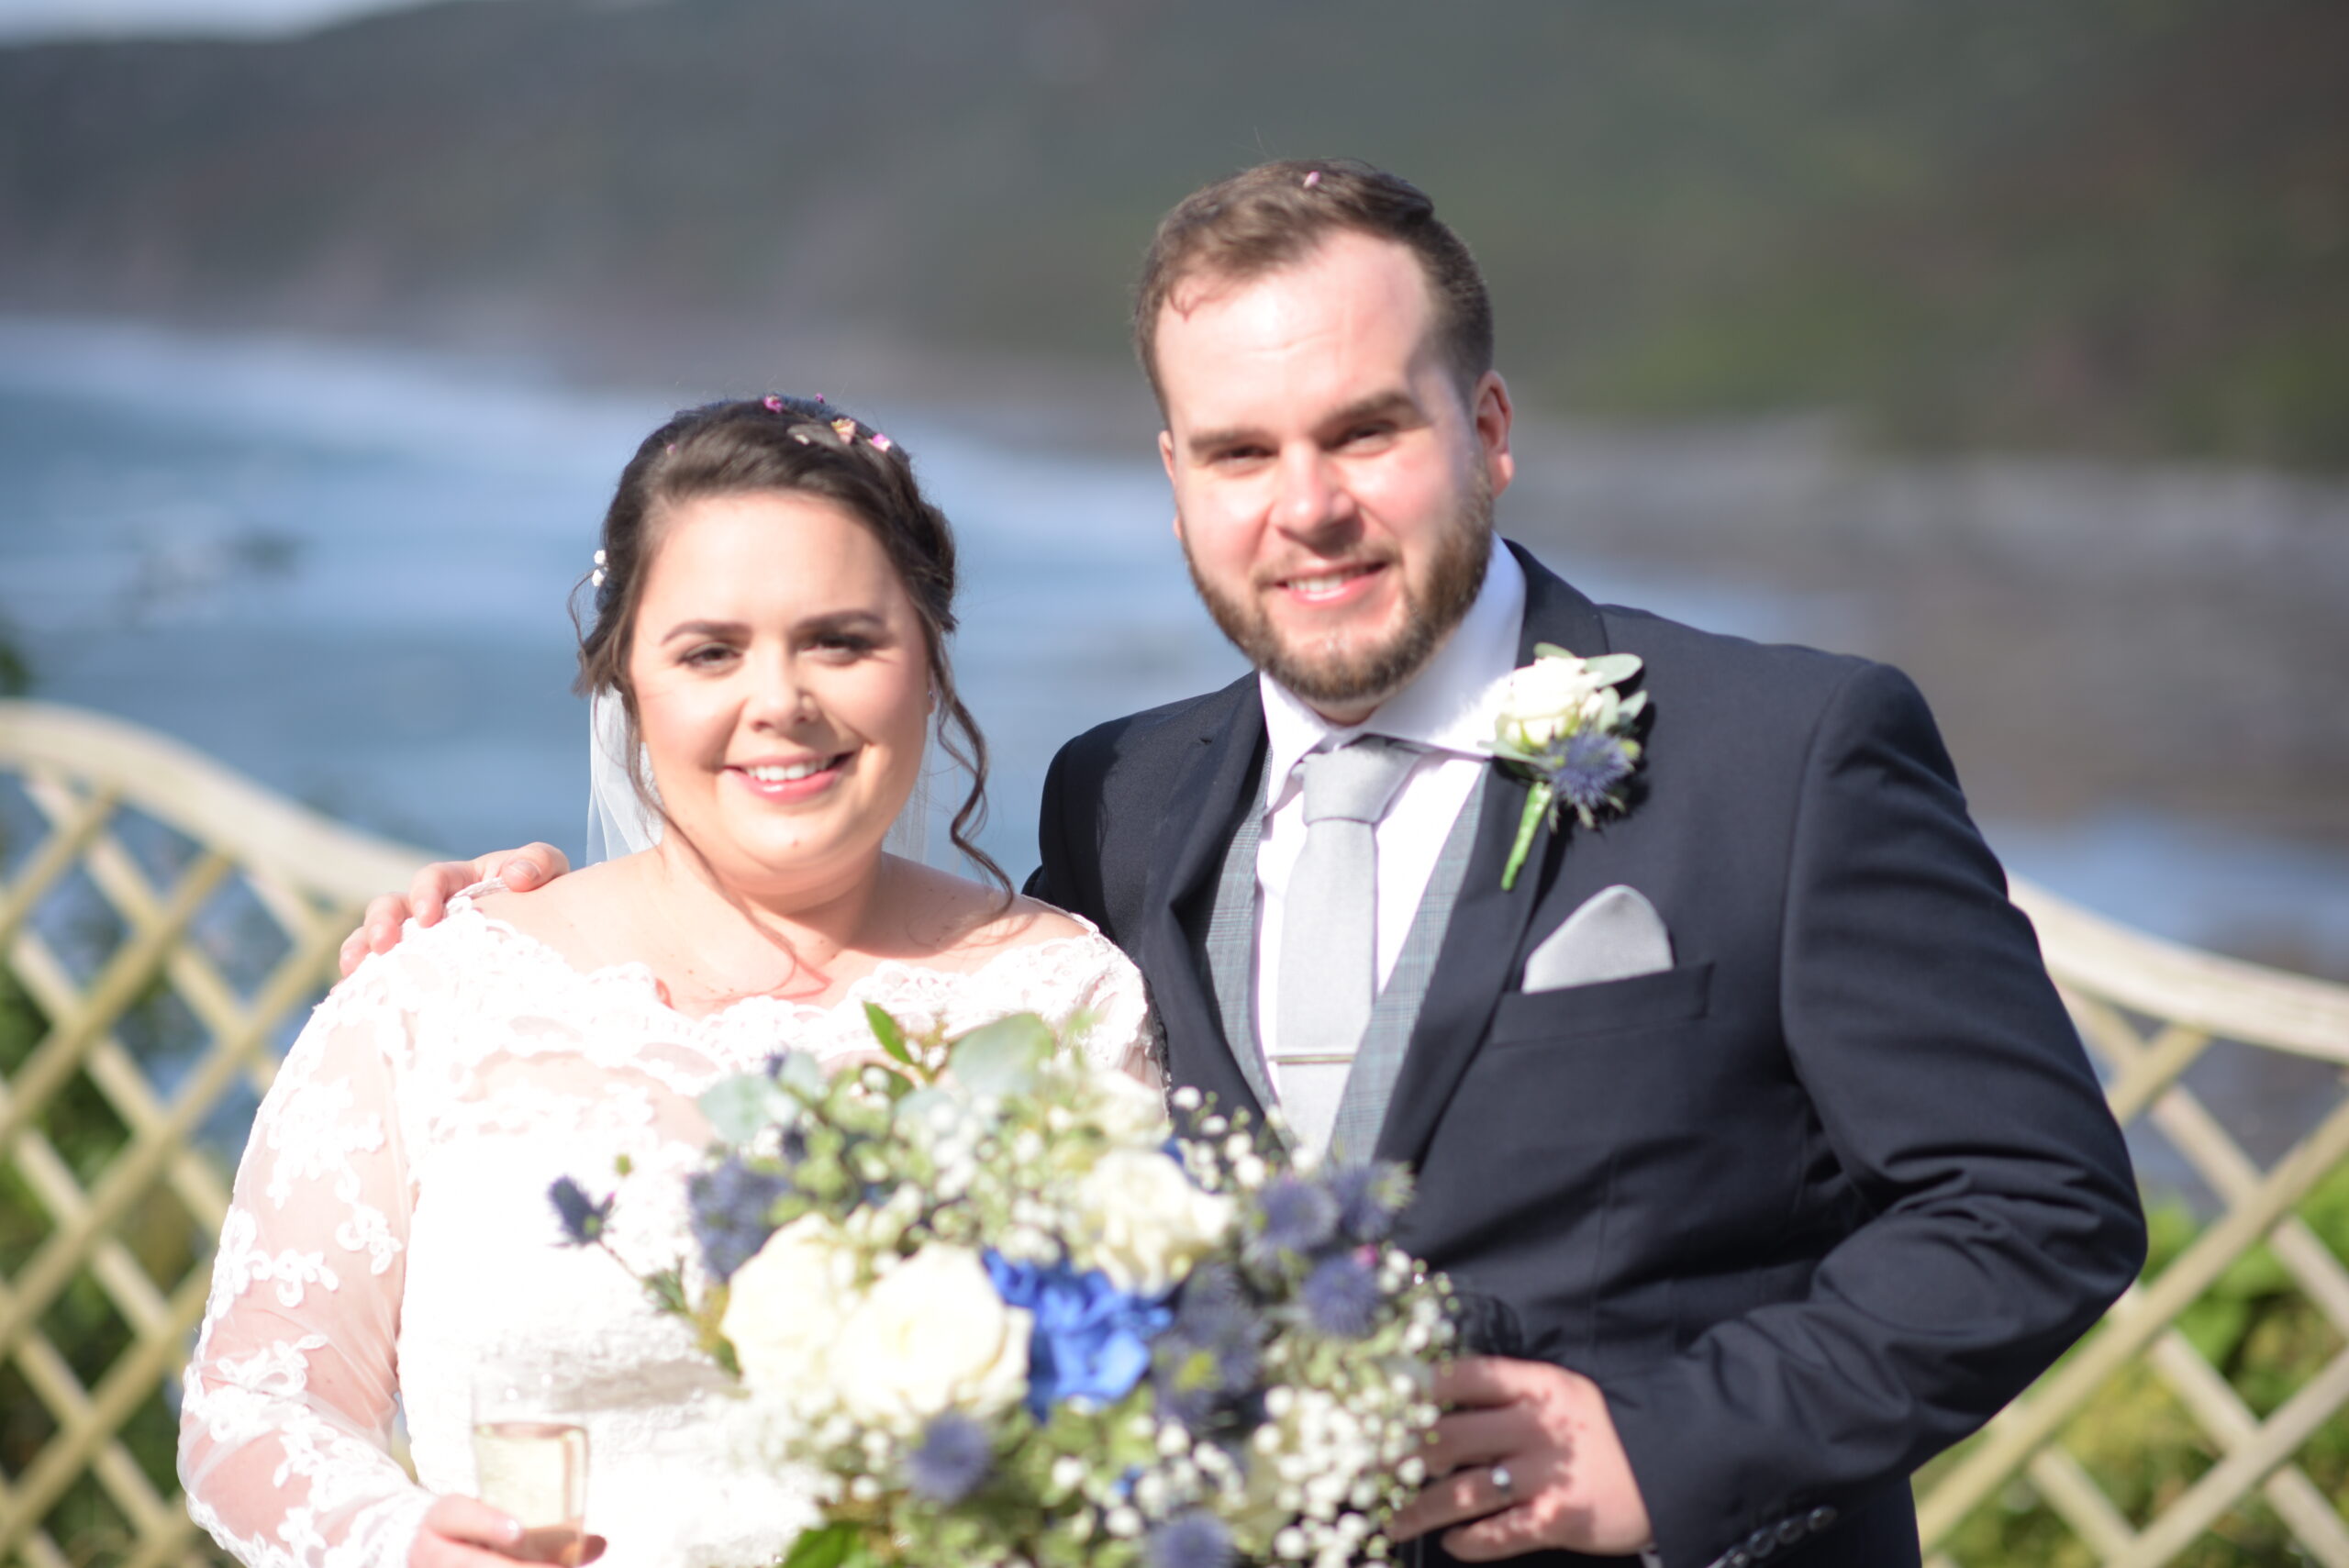 Wedding Photography in the grounds at Polhawn Fort Rame Head, Torpoint PL10 1LL